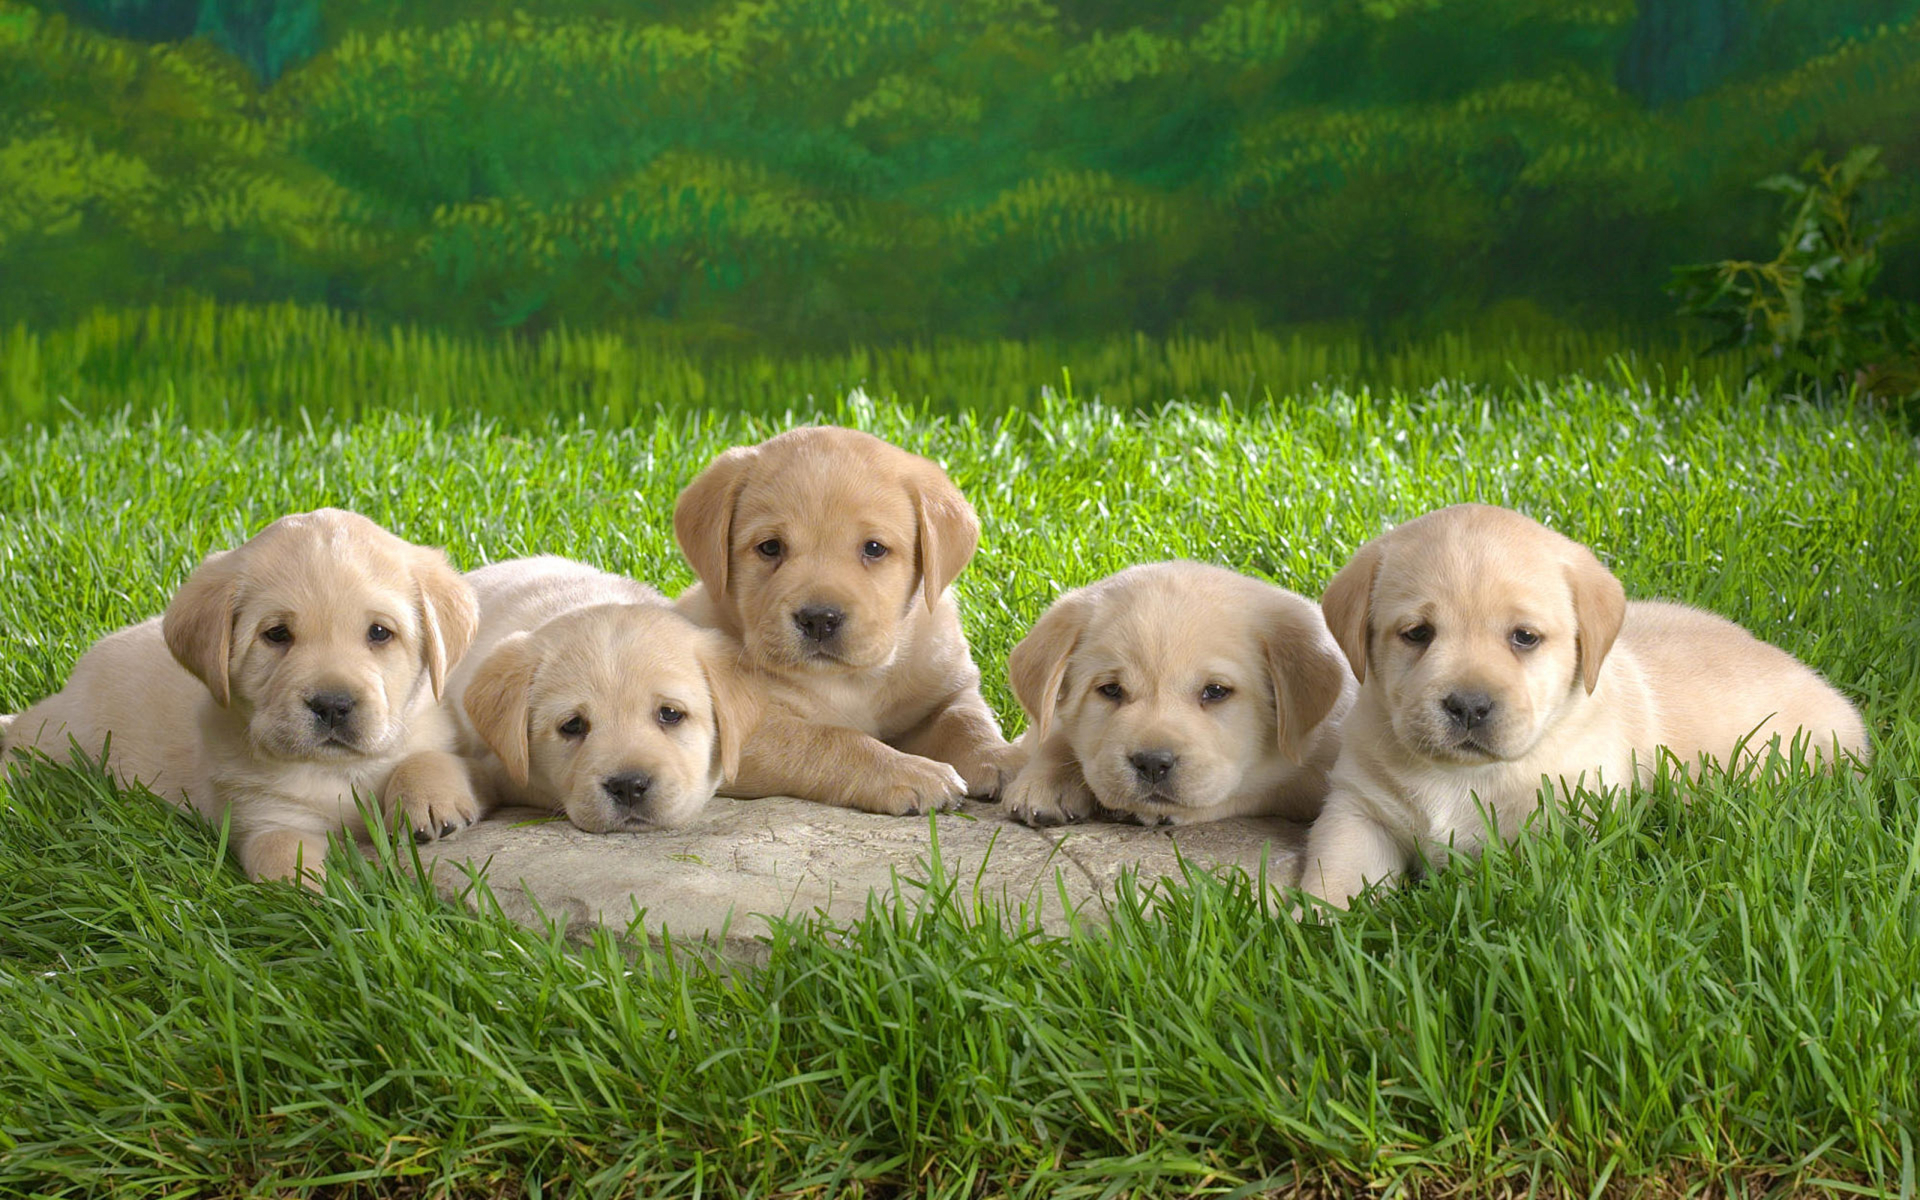 Five Cute Puppies - Image Abyss